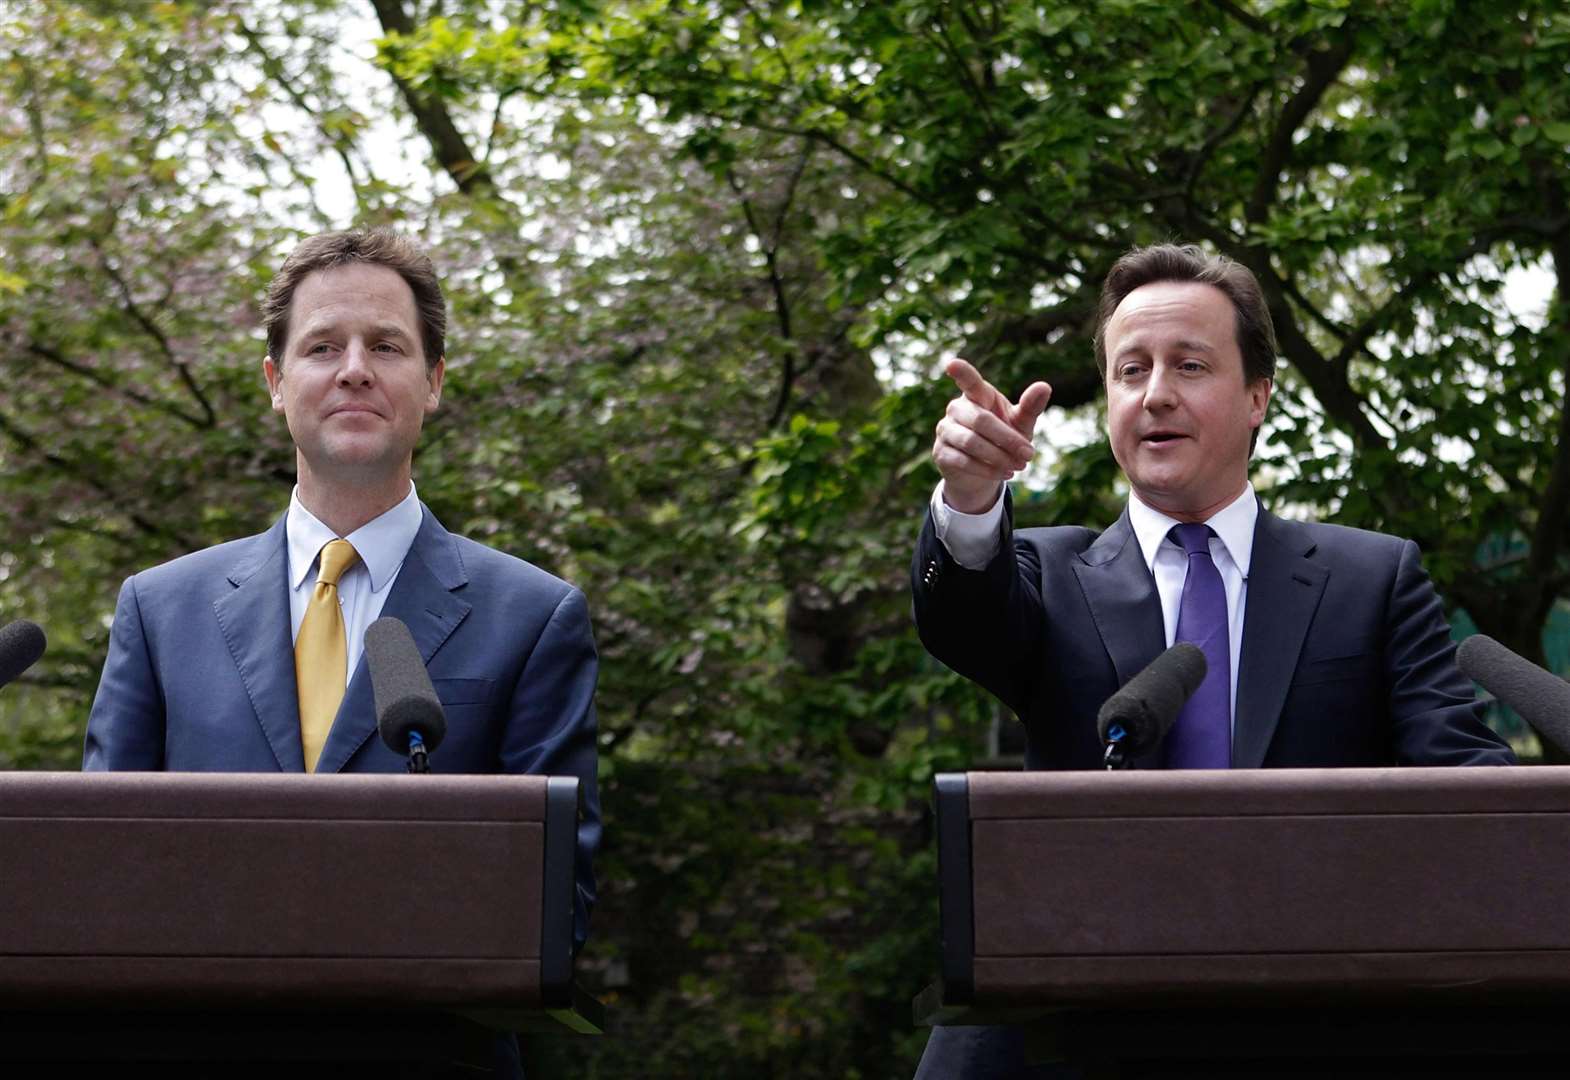 David Cameron (right) and Nick Clegg formed a coalition government after the 2010 election (Christopher Furlong/PA)